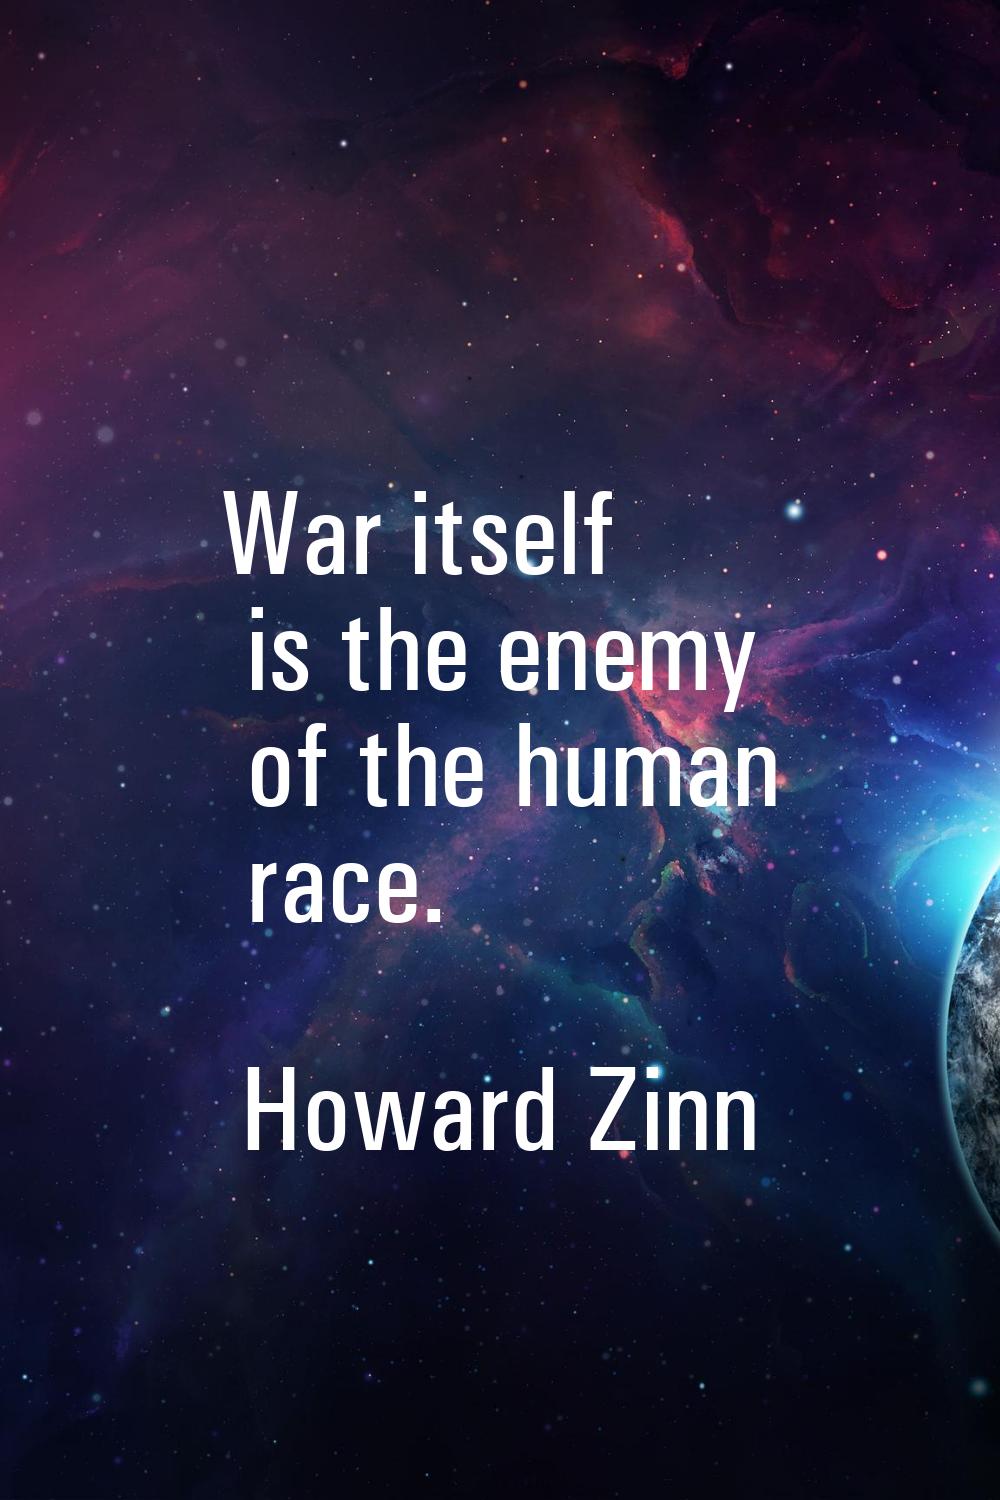 War itself is the enemy of the human race.